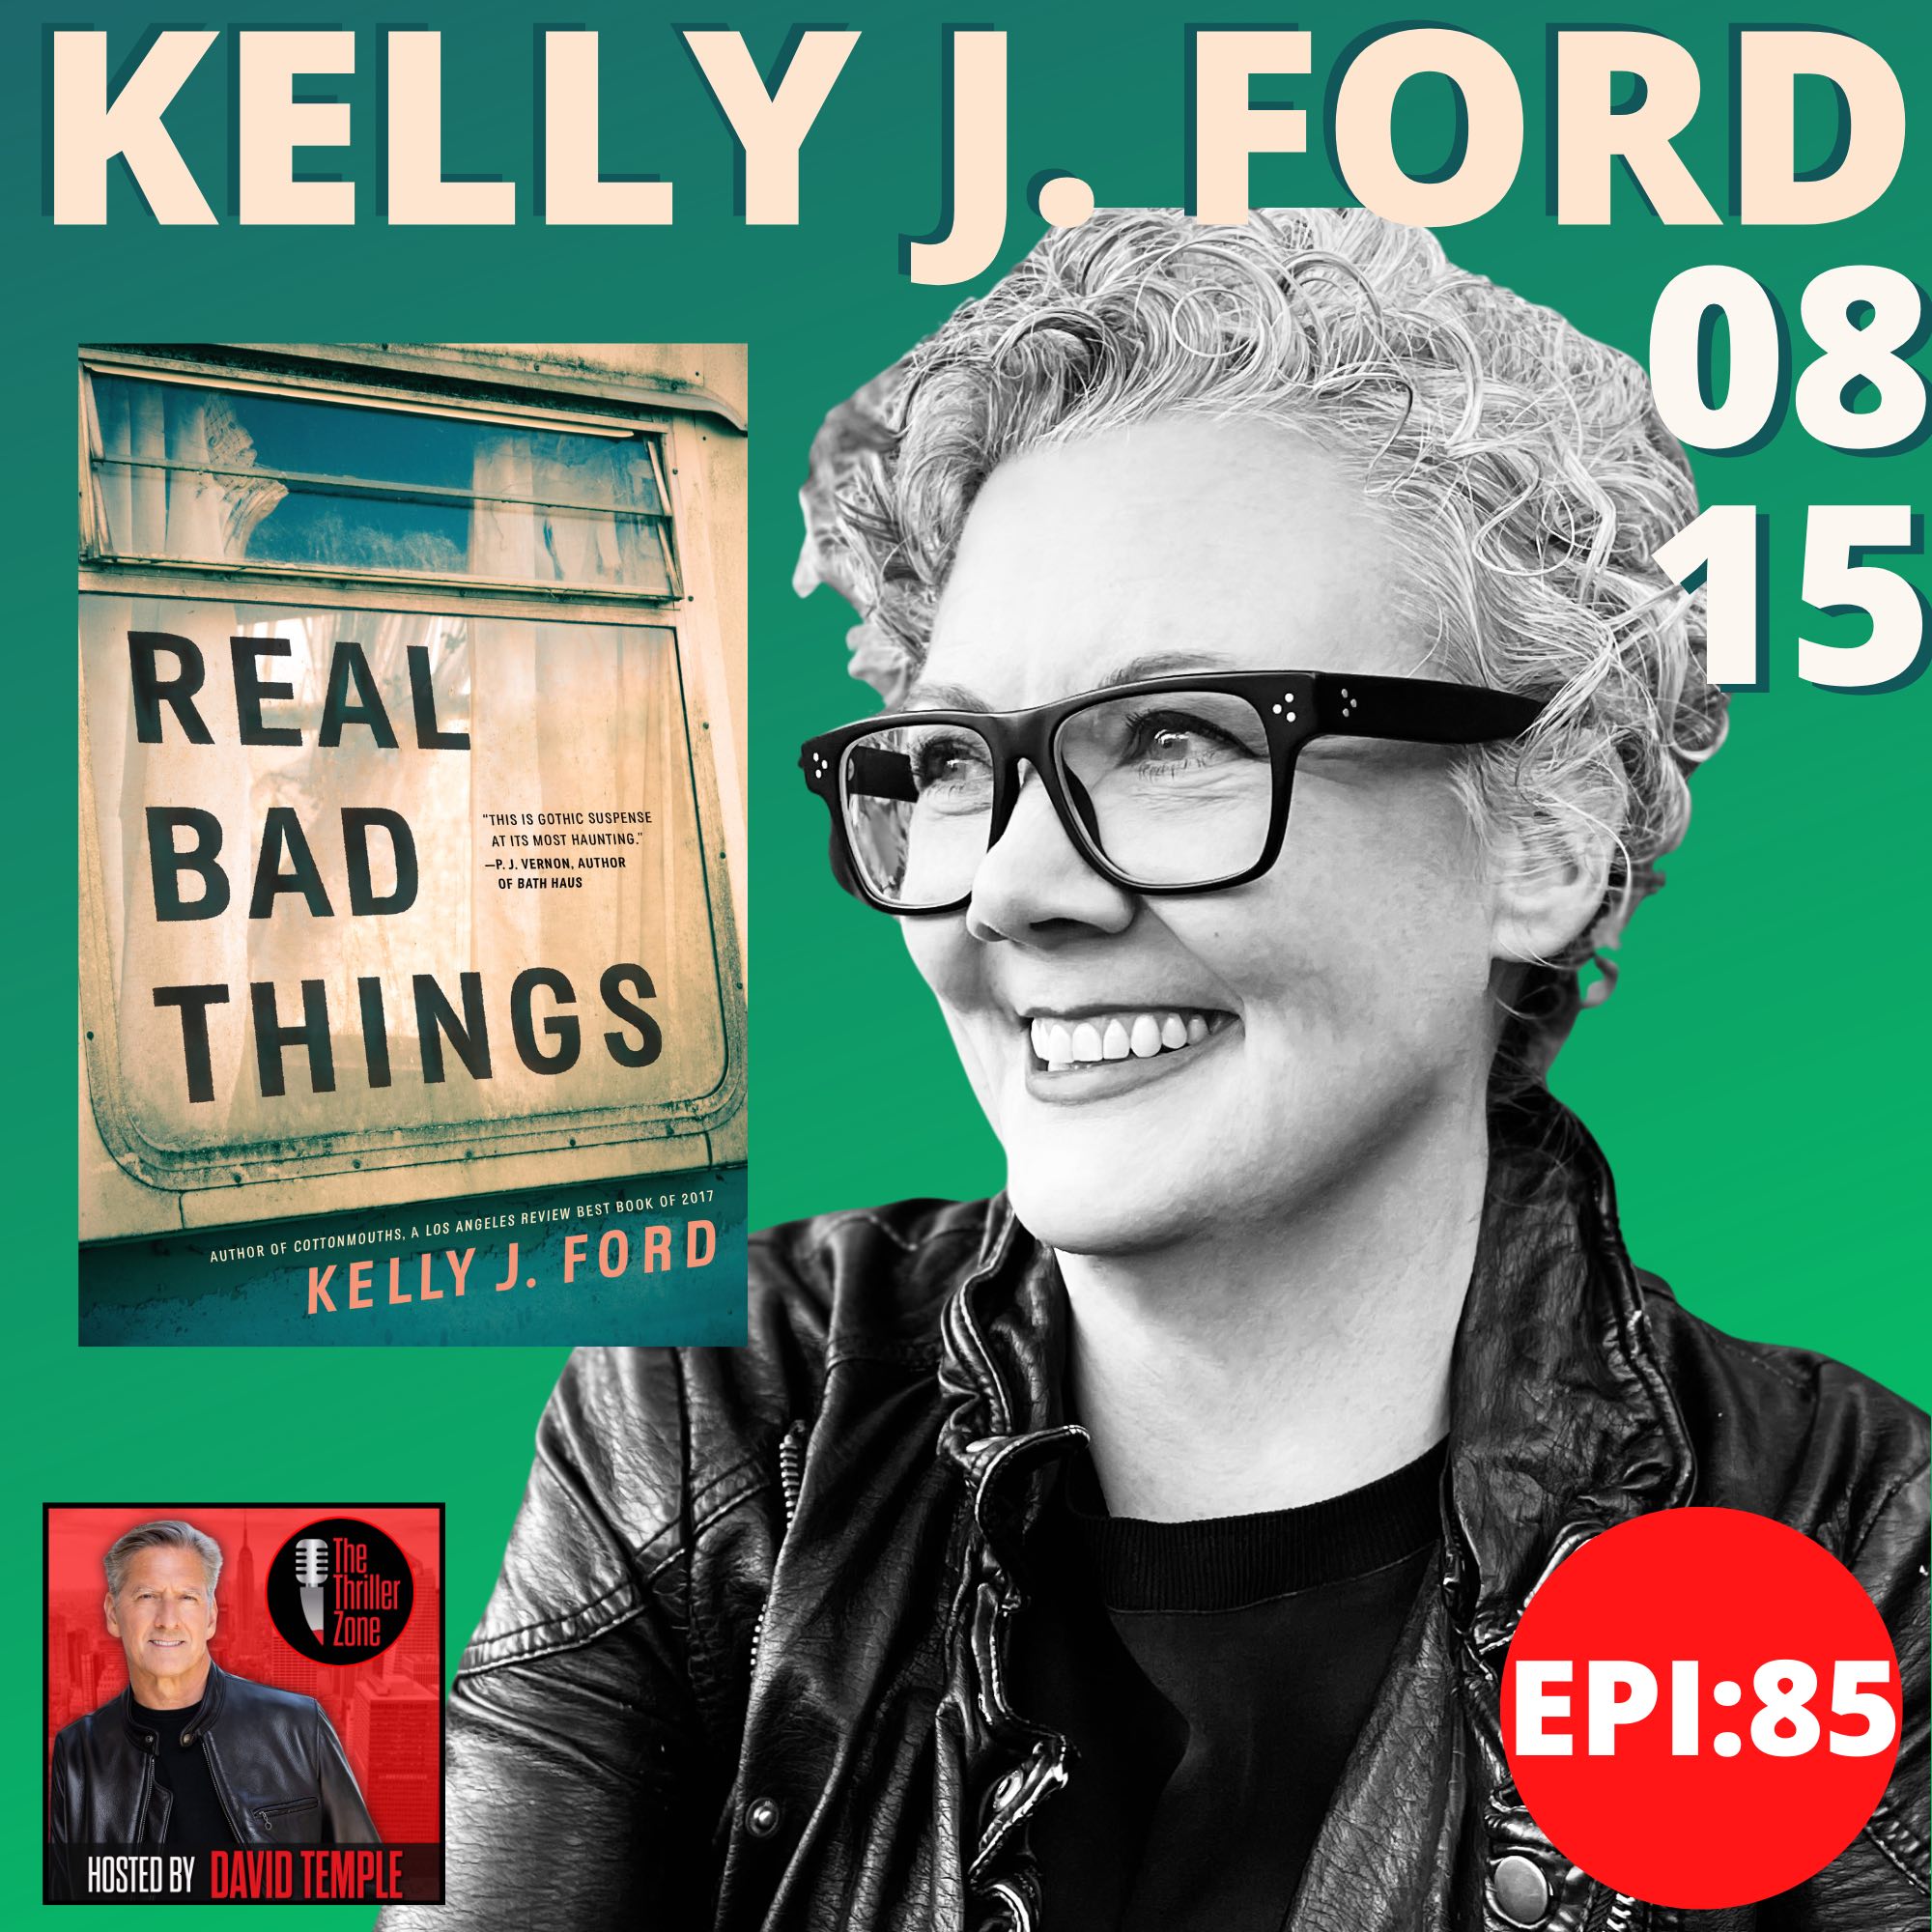 Kelly J. Ford, author of Real Bad Things Image